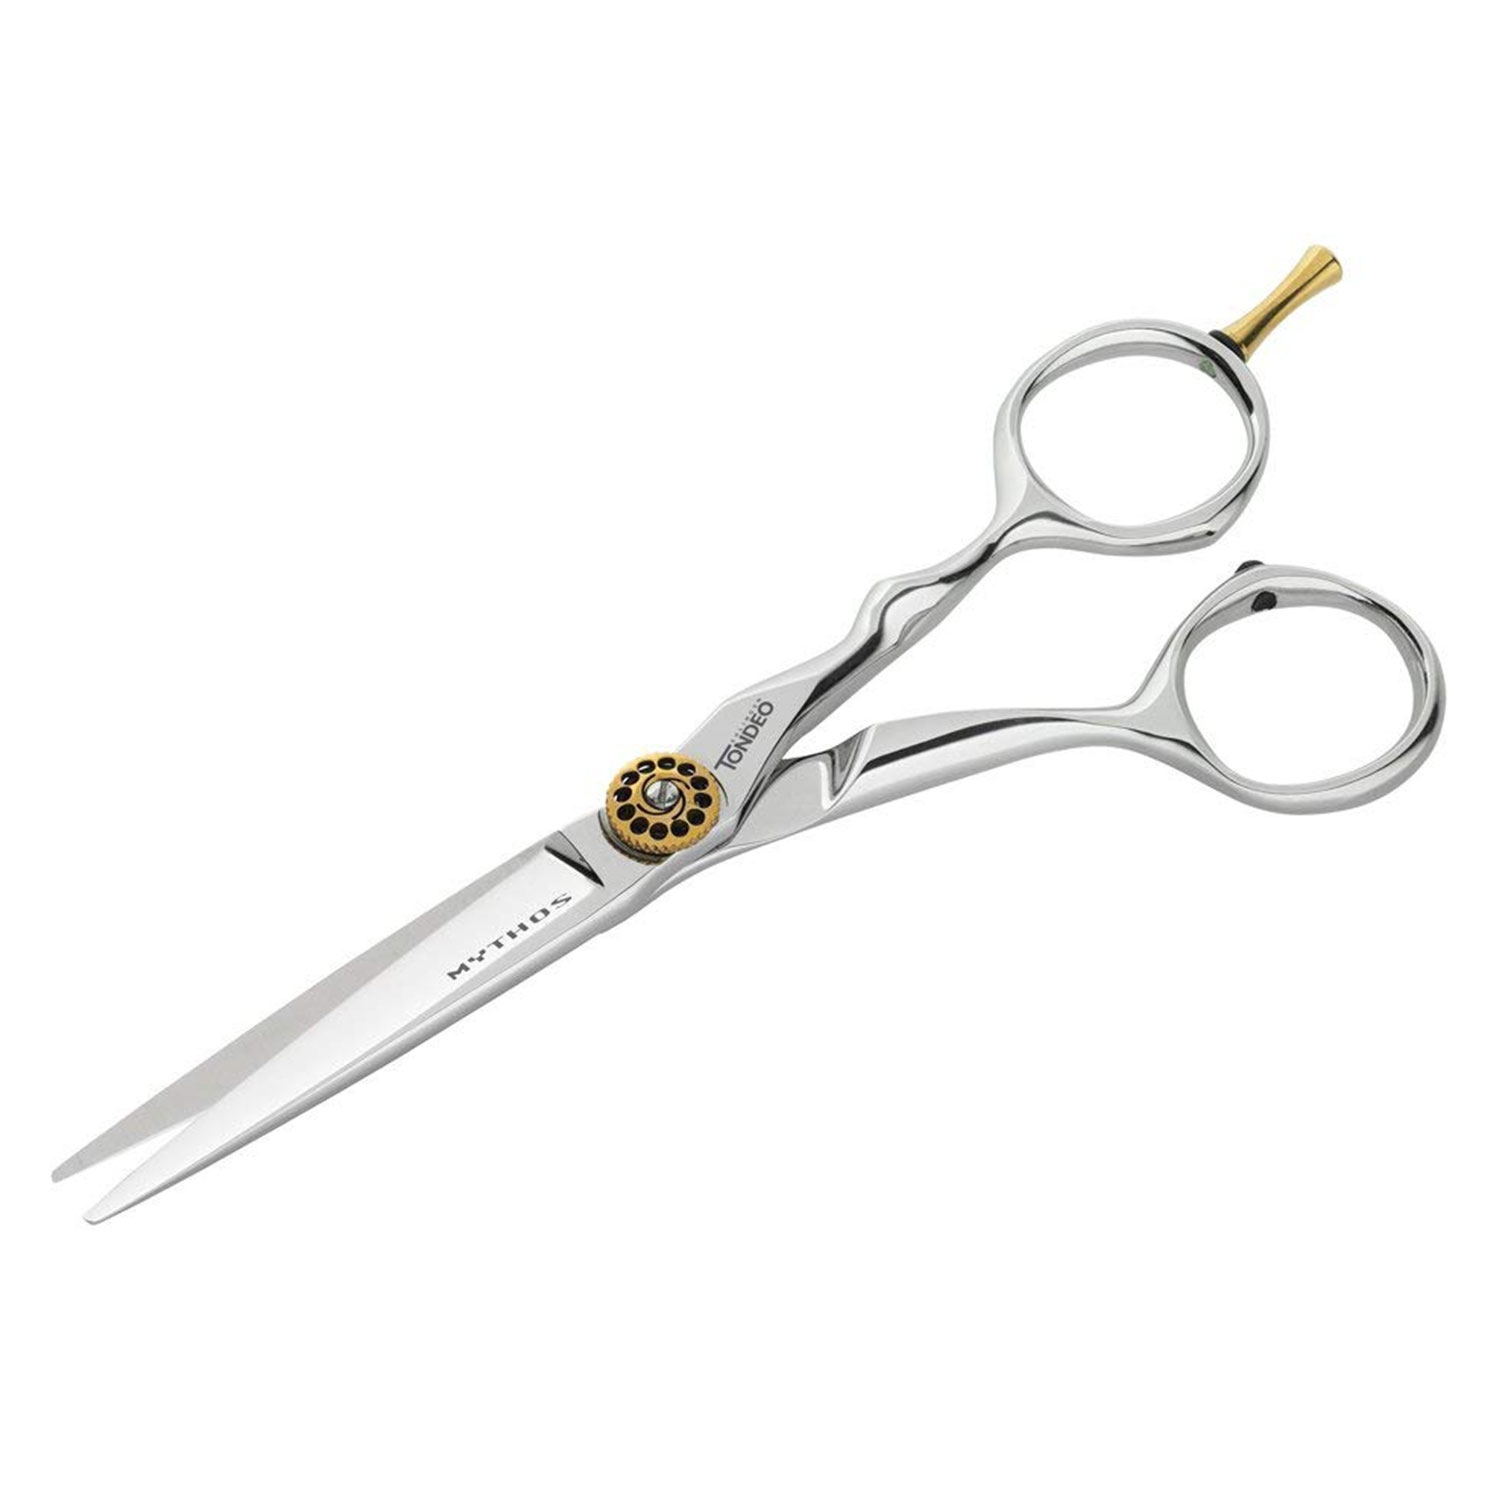 Product image from Tondeo Scissors - Mythos Offset Scissors 5.0"